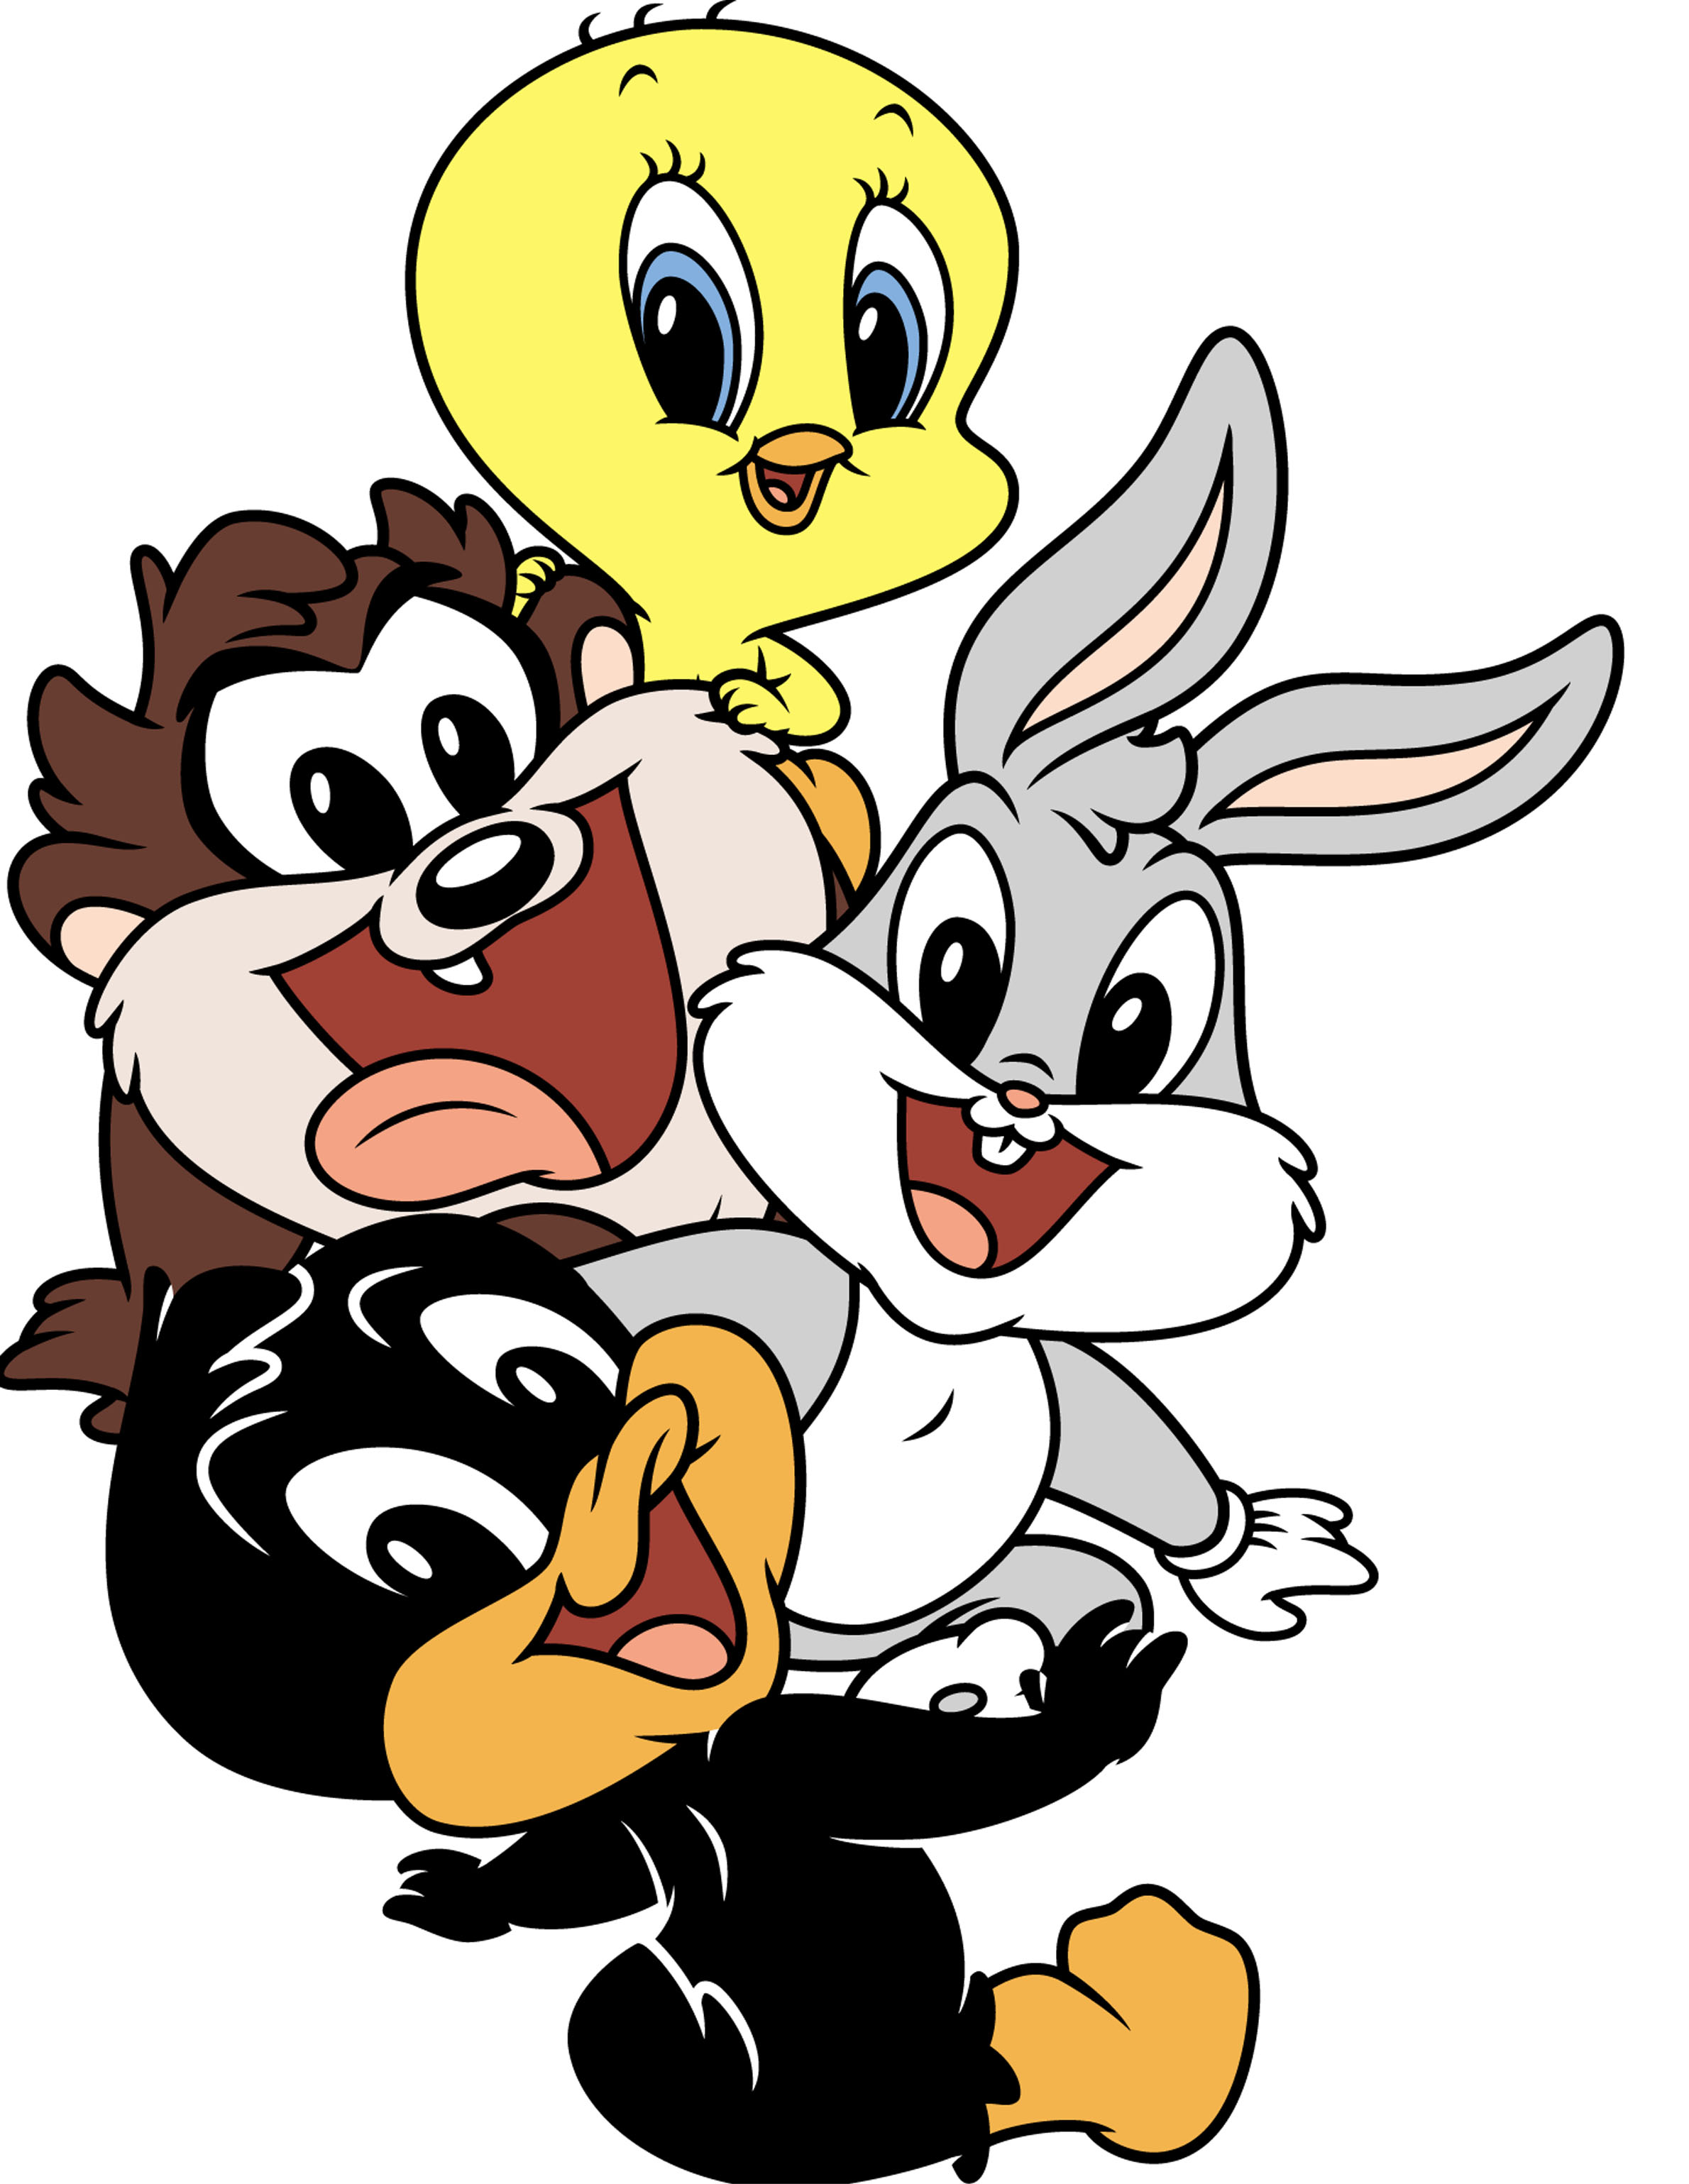 Looney Tunes Wallpaper Free Download - Les Baby Looney Tunes - 2380x3078  Wallpaper 